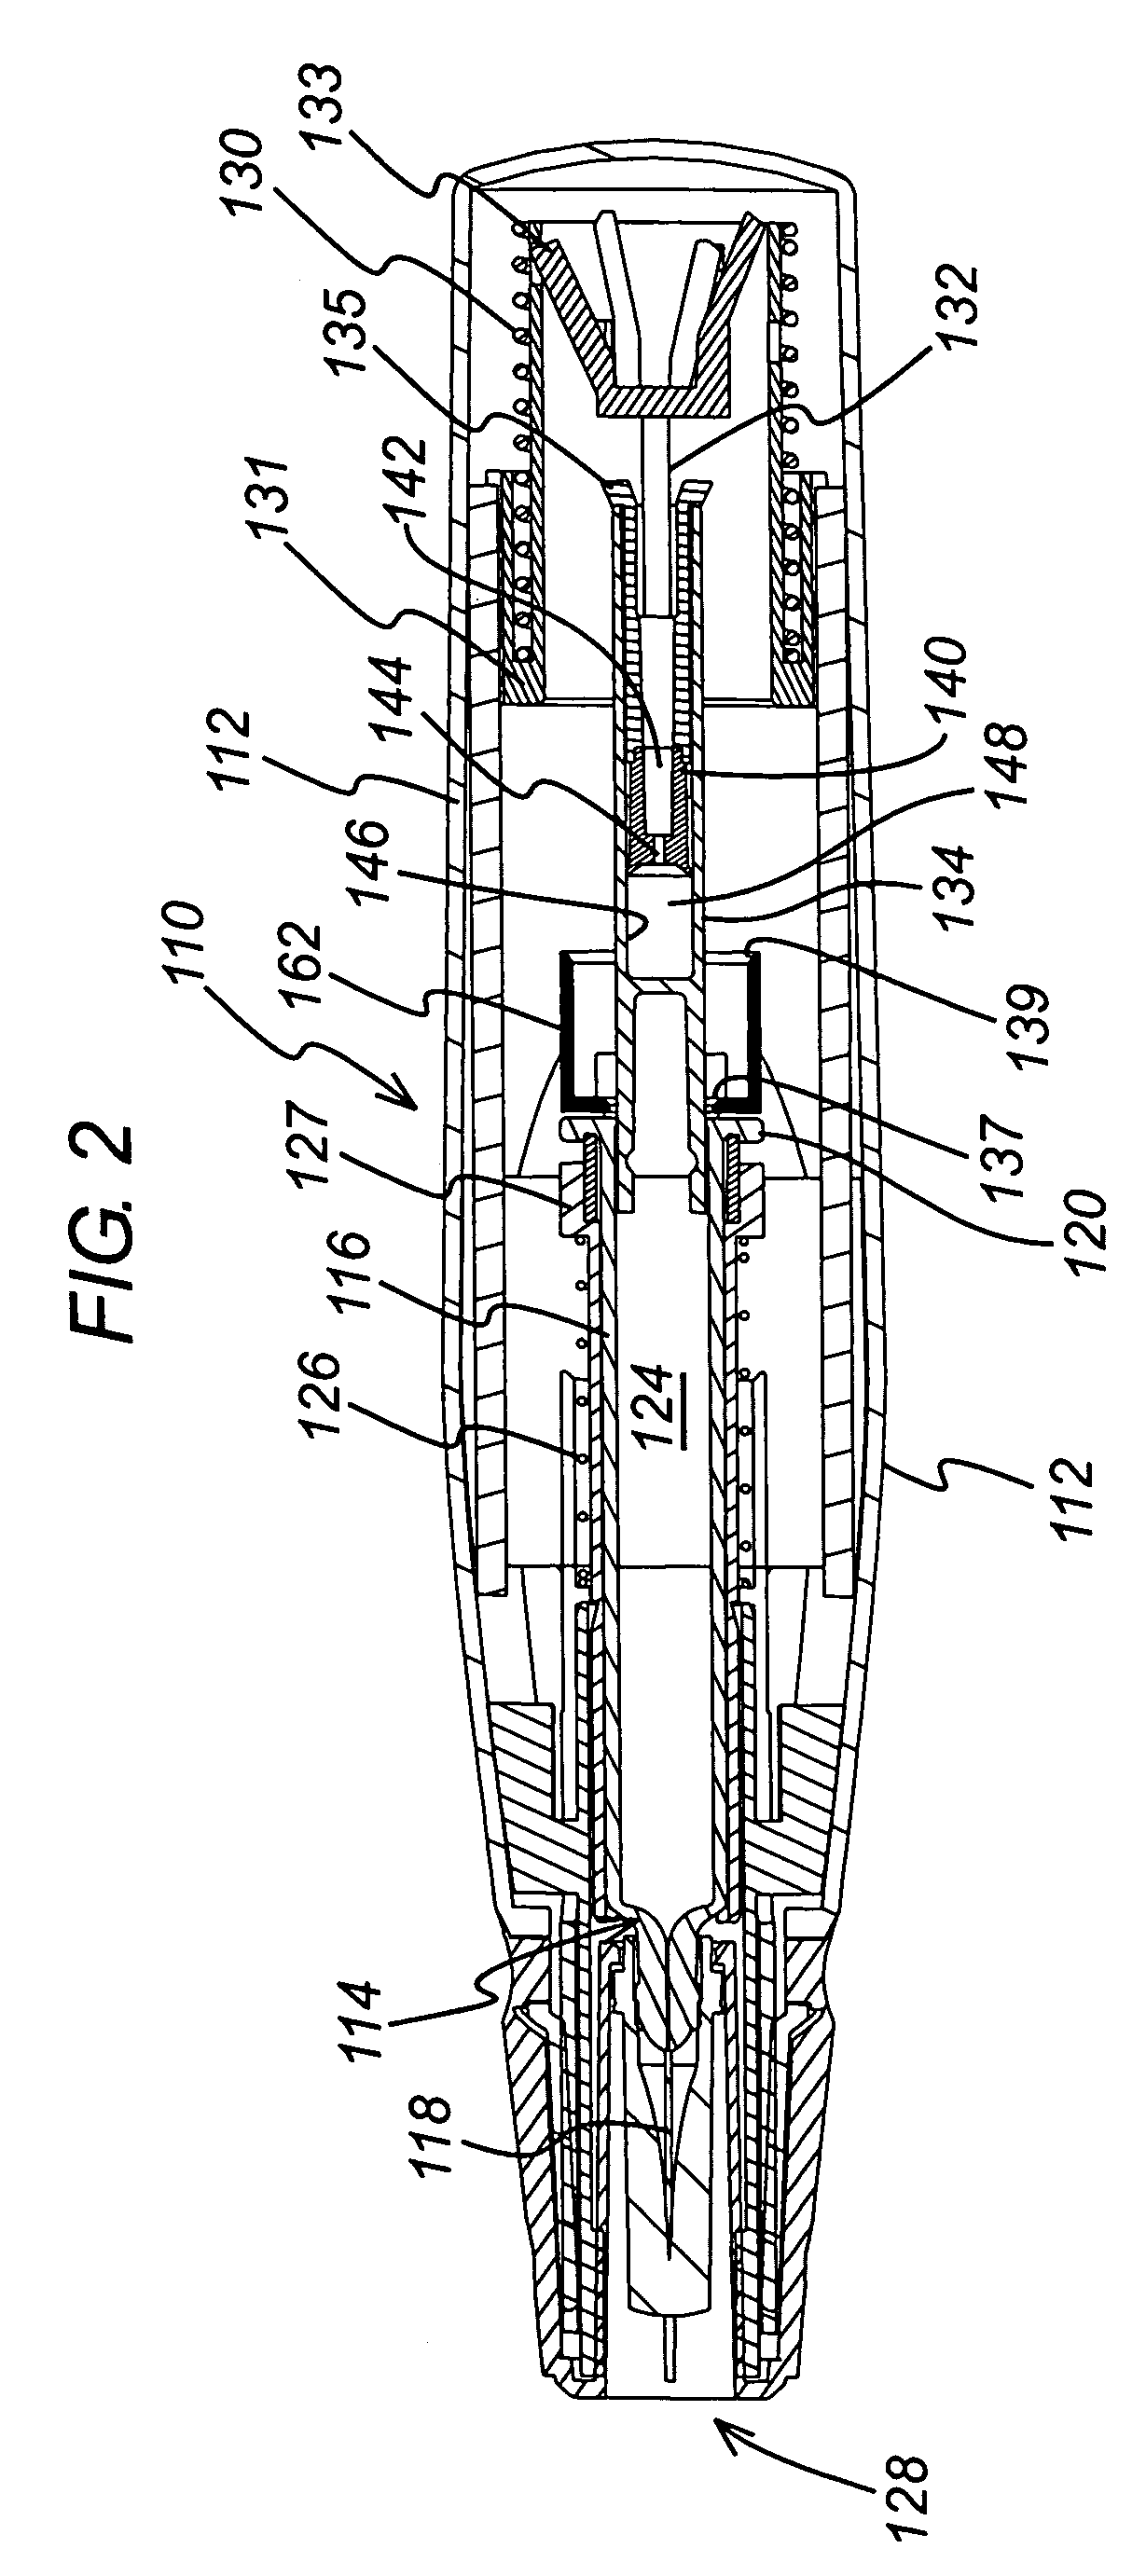 Injection device